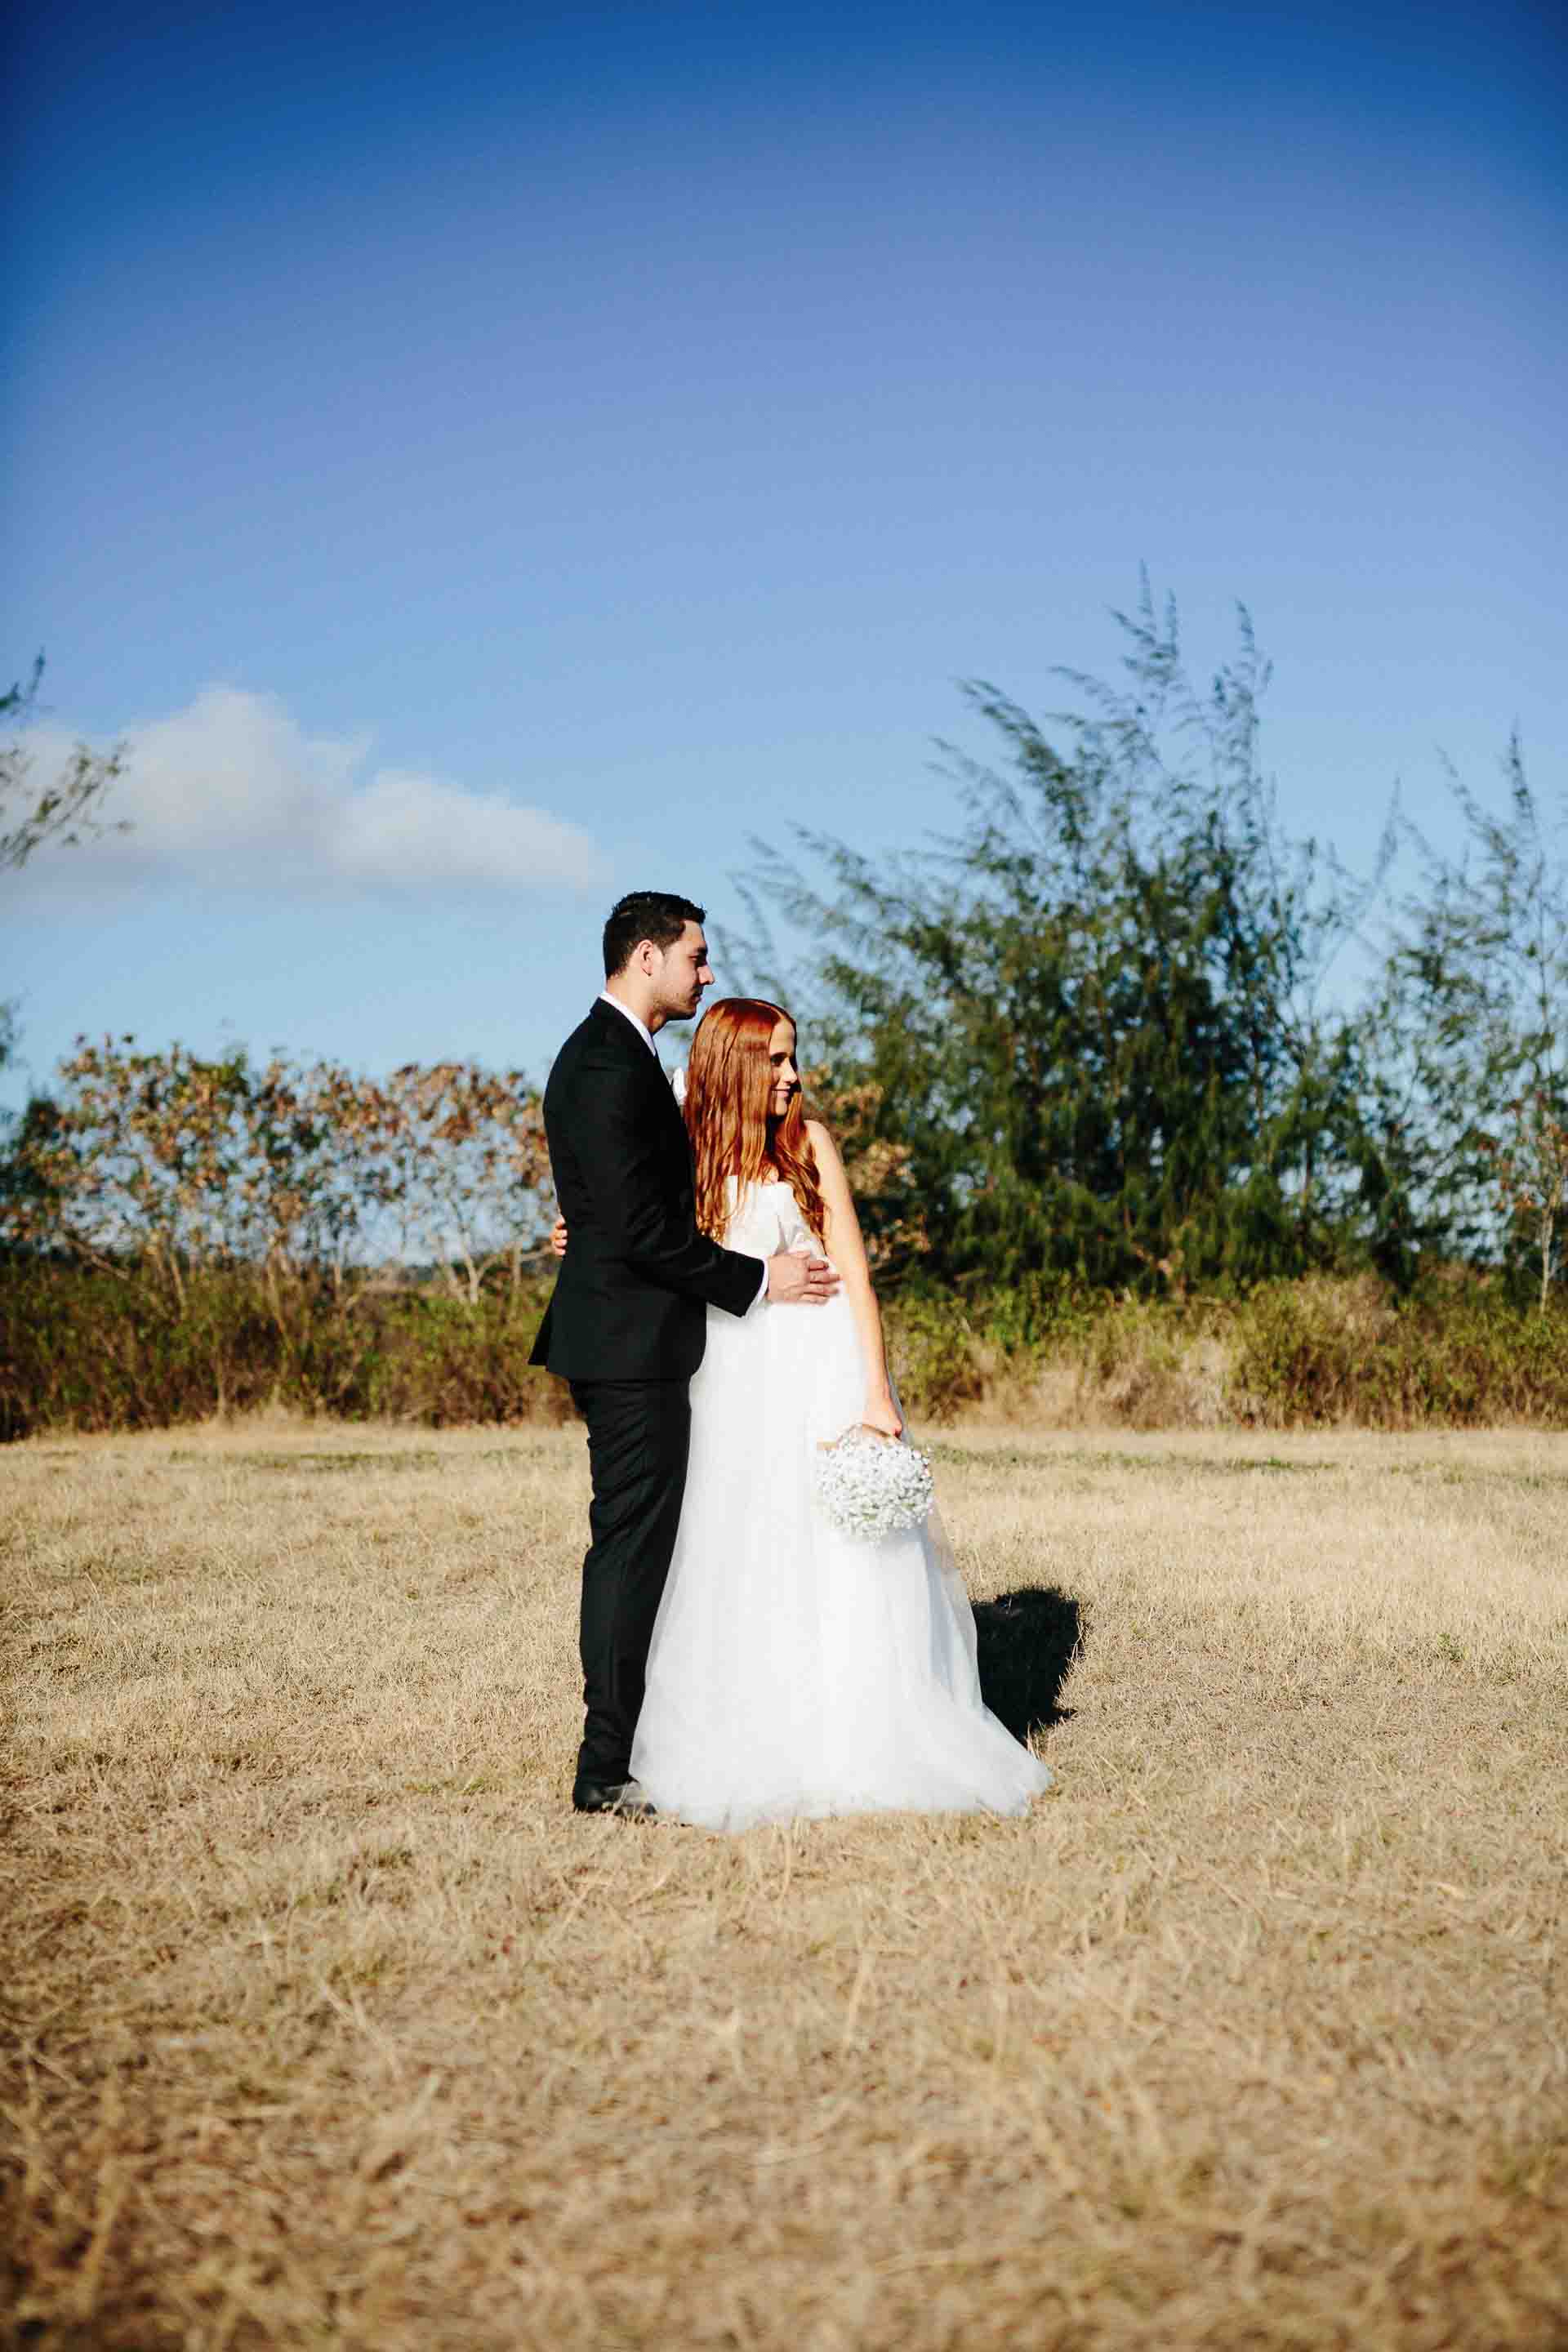 the newlyweds posing together in an open field with a blue sky behind them